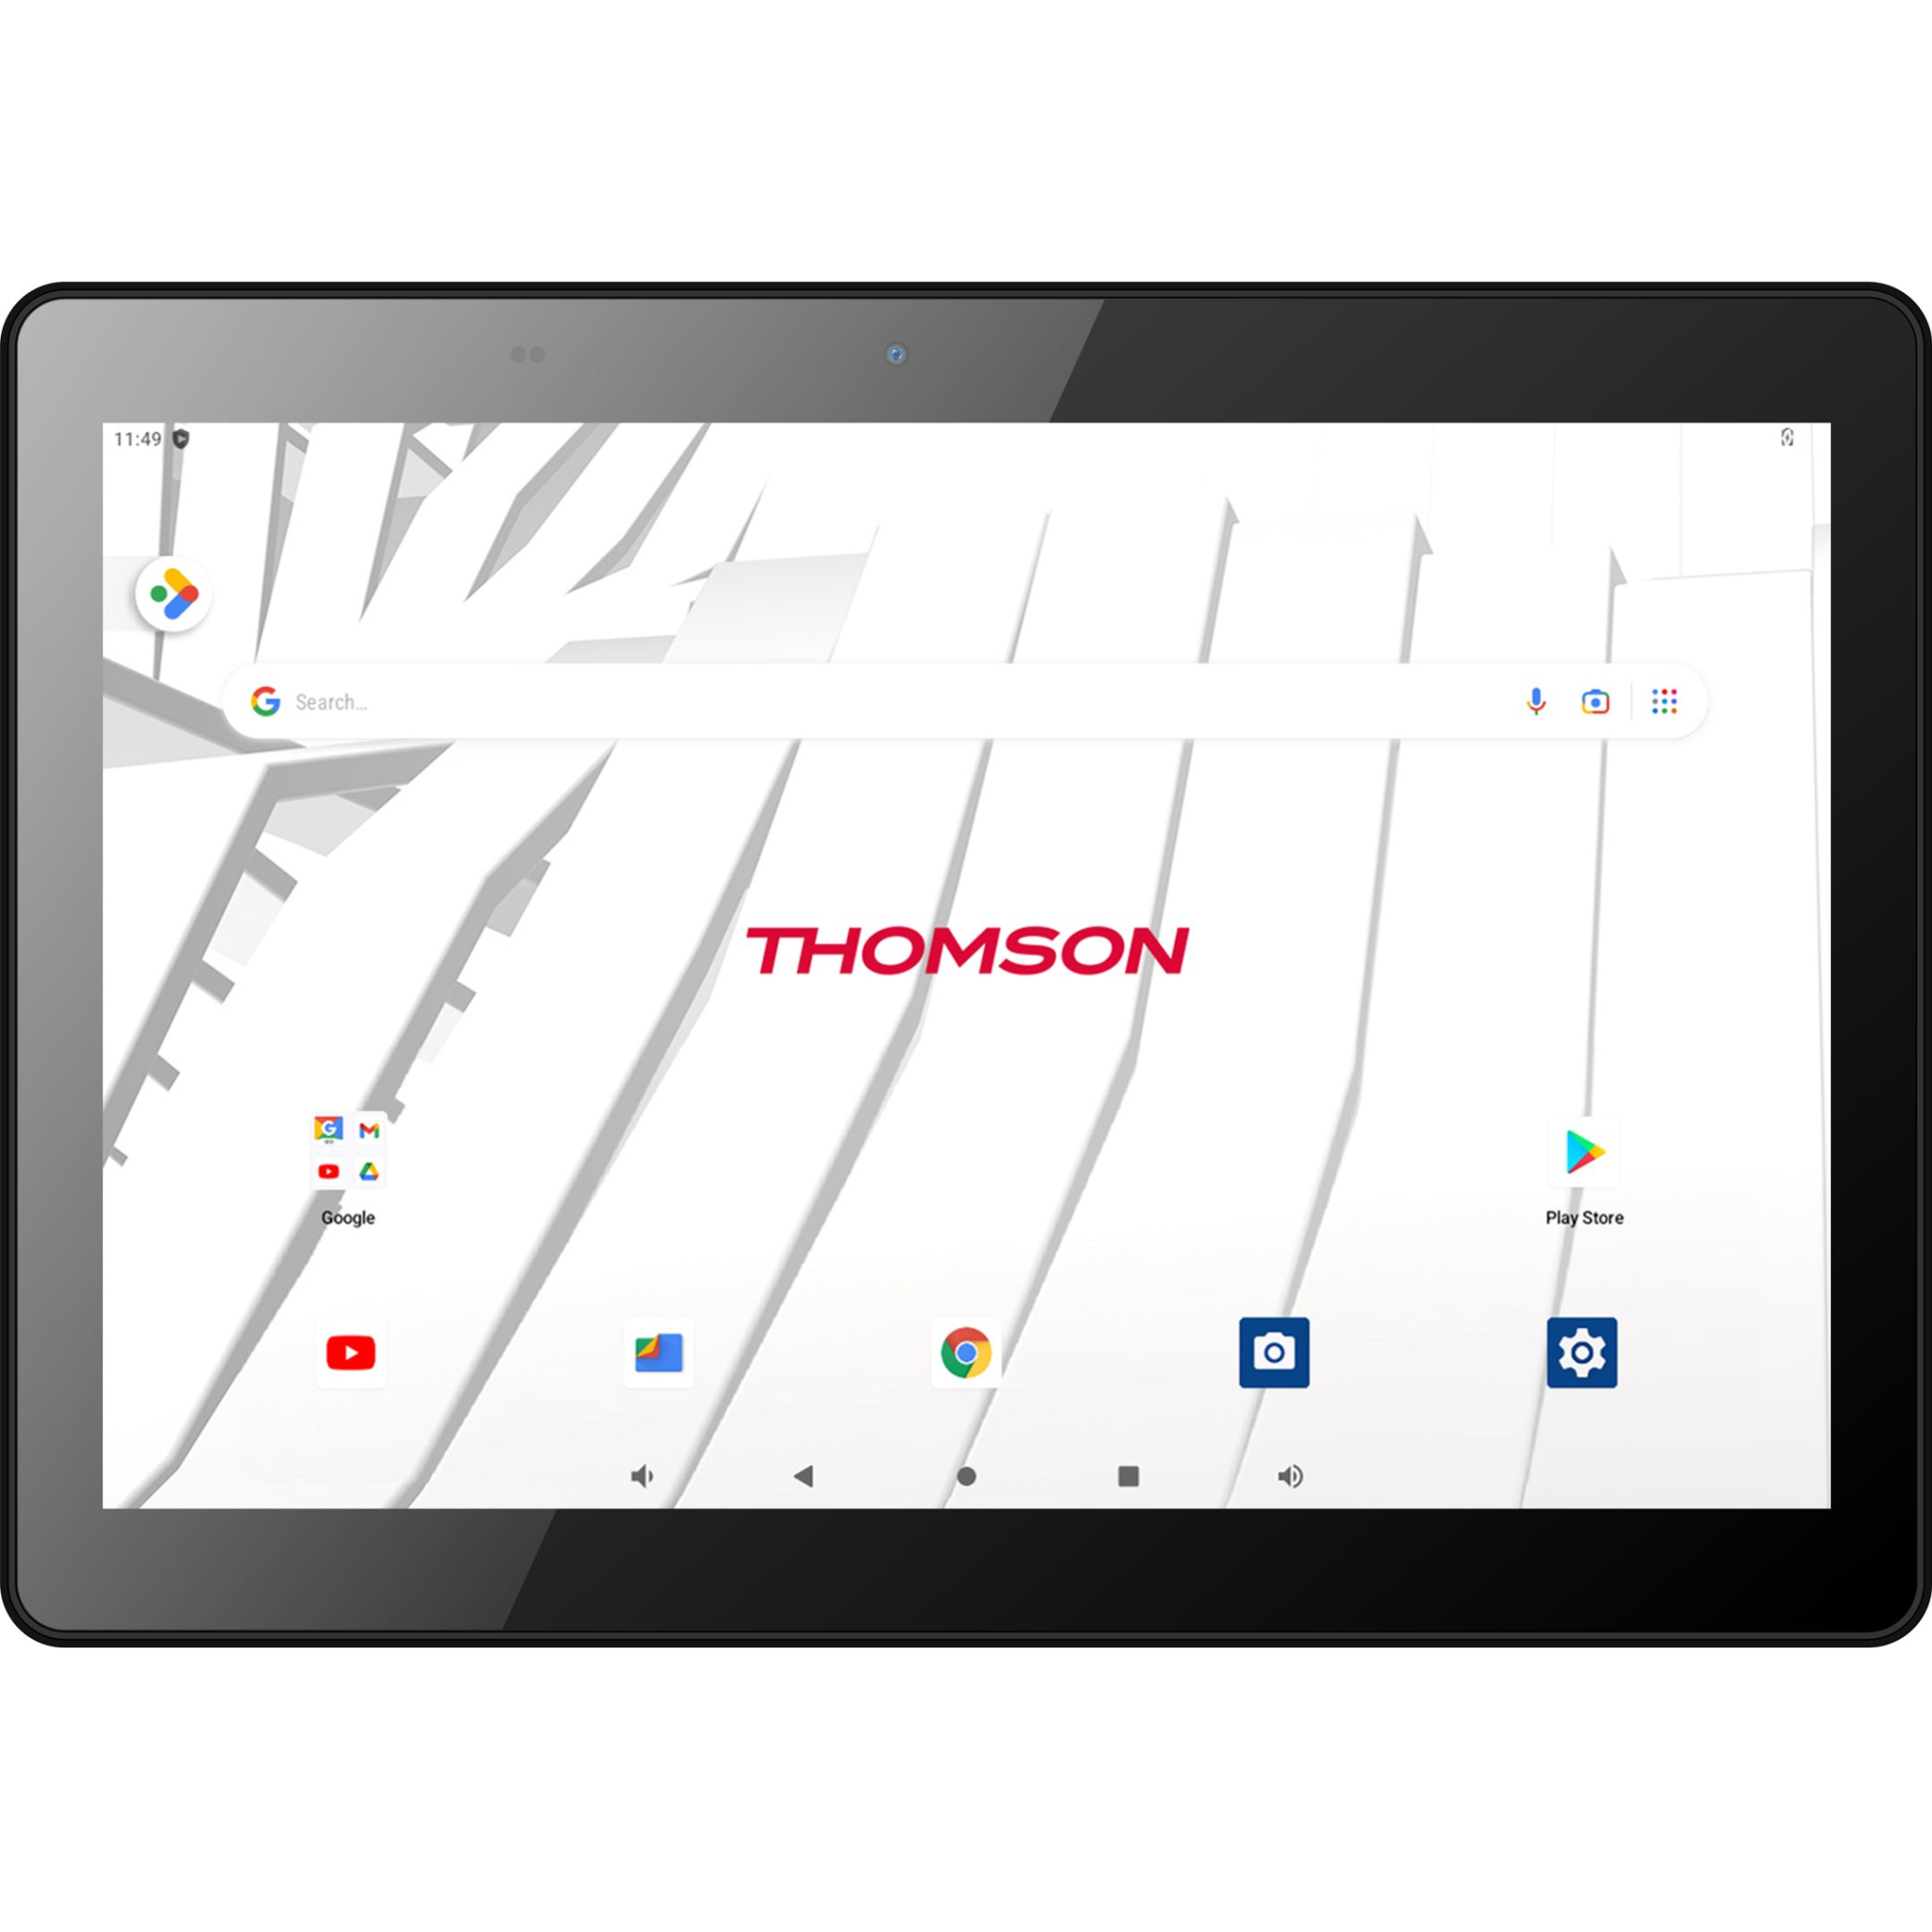 3663792027876 Thomson TEO 10'' IPS, 32GB, WiFi, Android 12, Black - Androi Computer & IT,Tablets,Android tablets 14600016690 TEO10A2BK32P